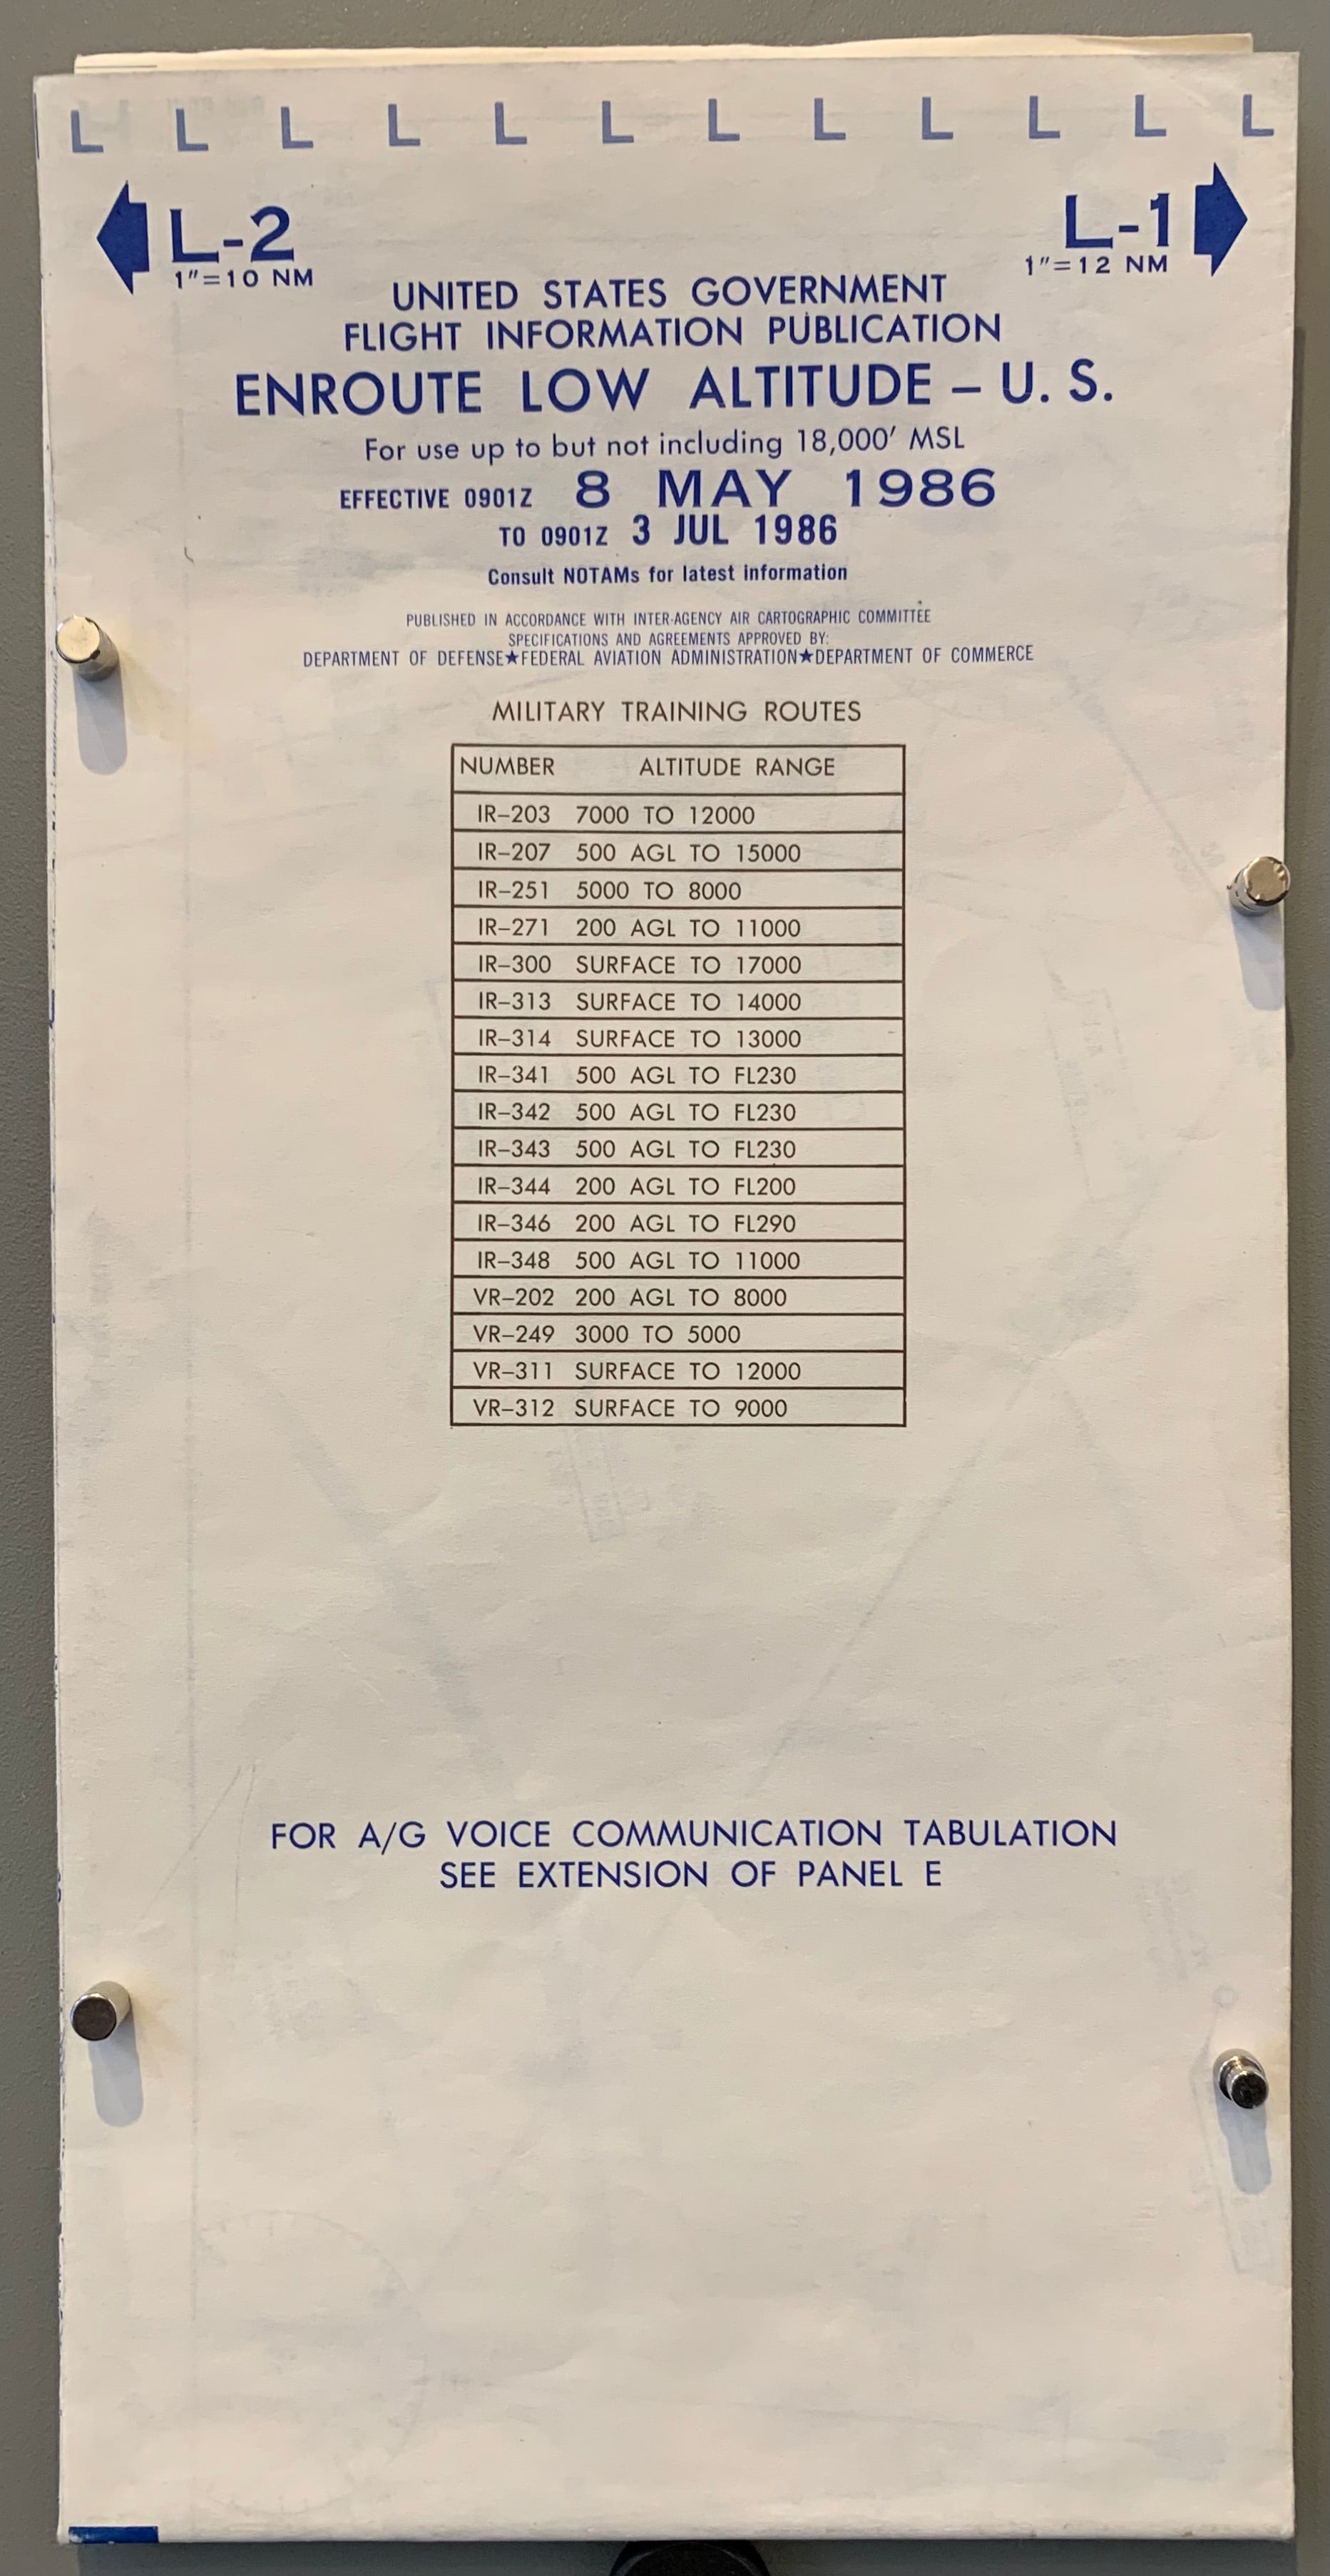 IFR Enroute Low Altitude (U.S.), 1986 (Double-Sided)